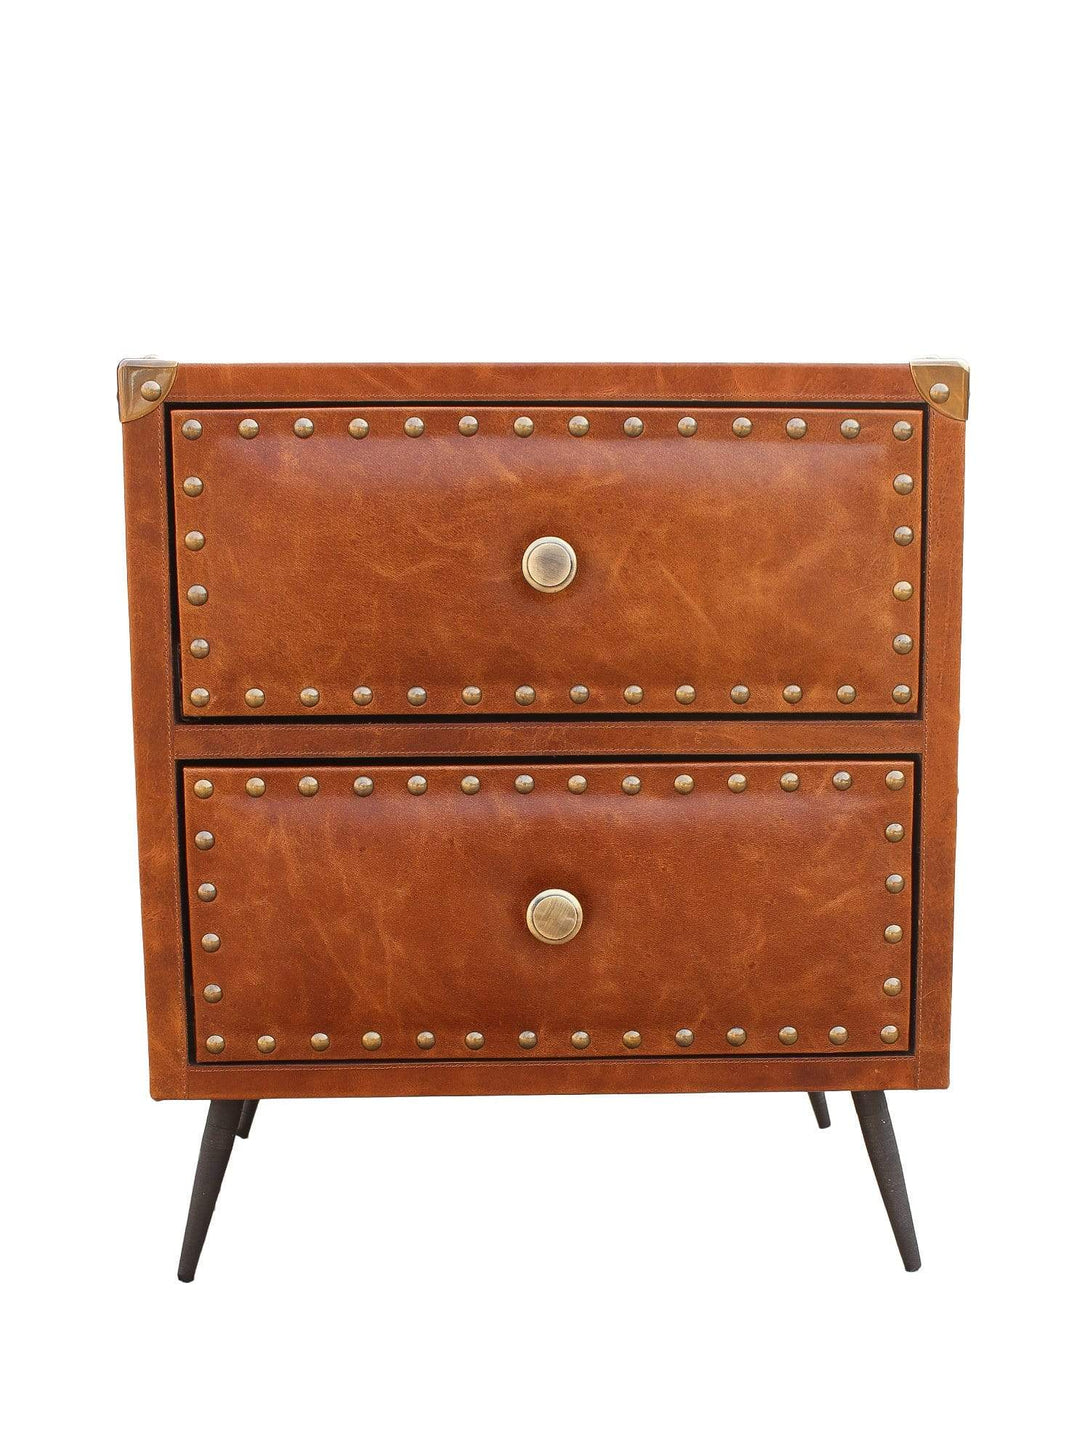 BIRMINGHAM - TWO DRAWER LEATHER SIDE TABLE - ART AVENUE